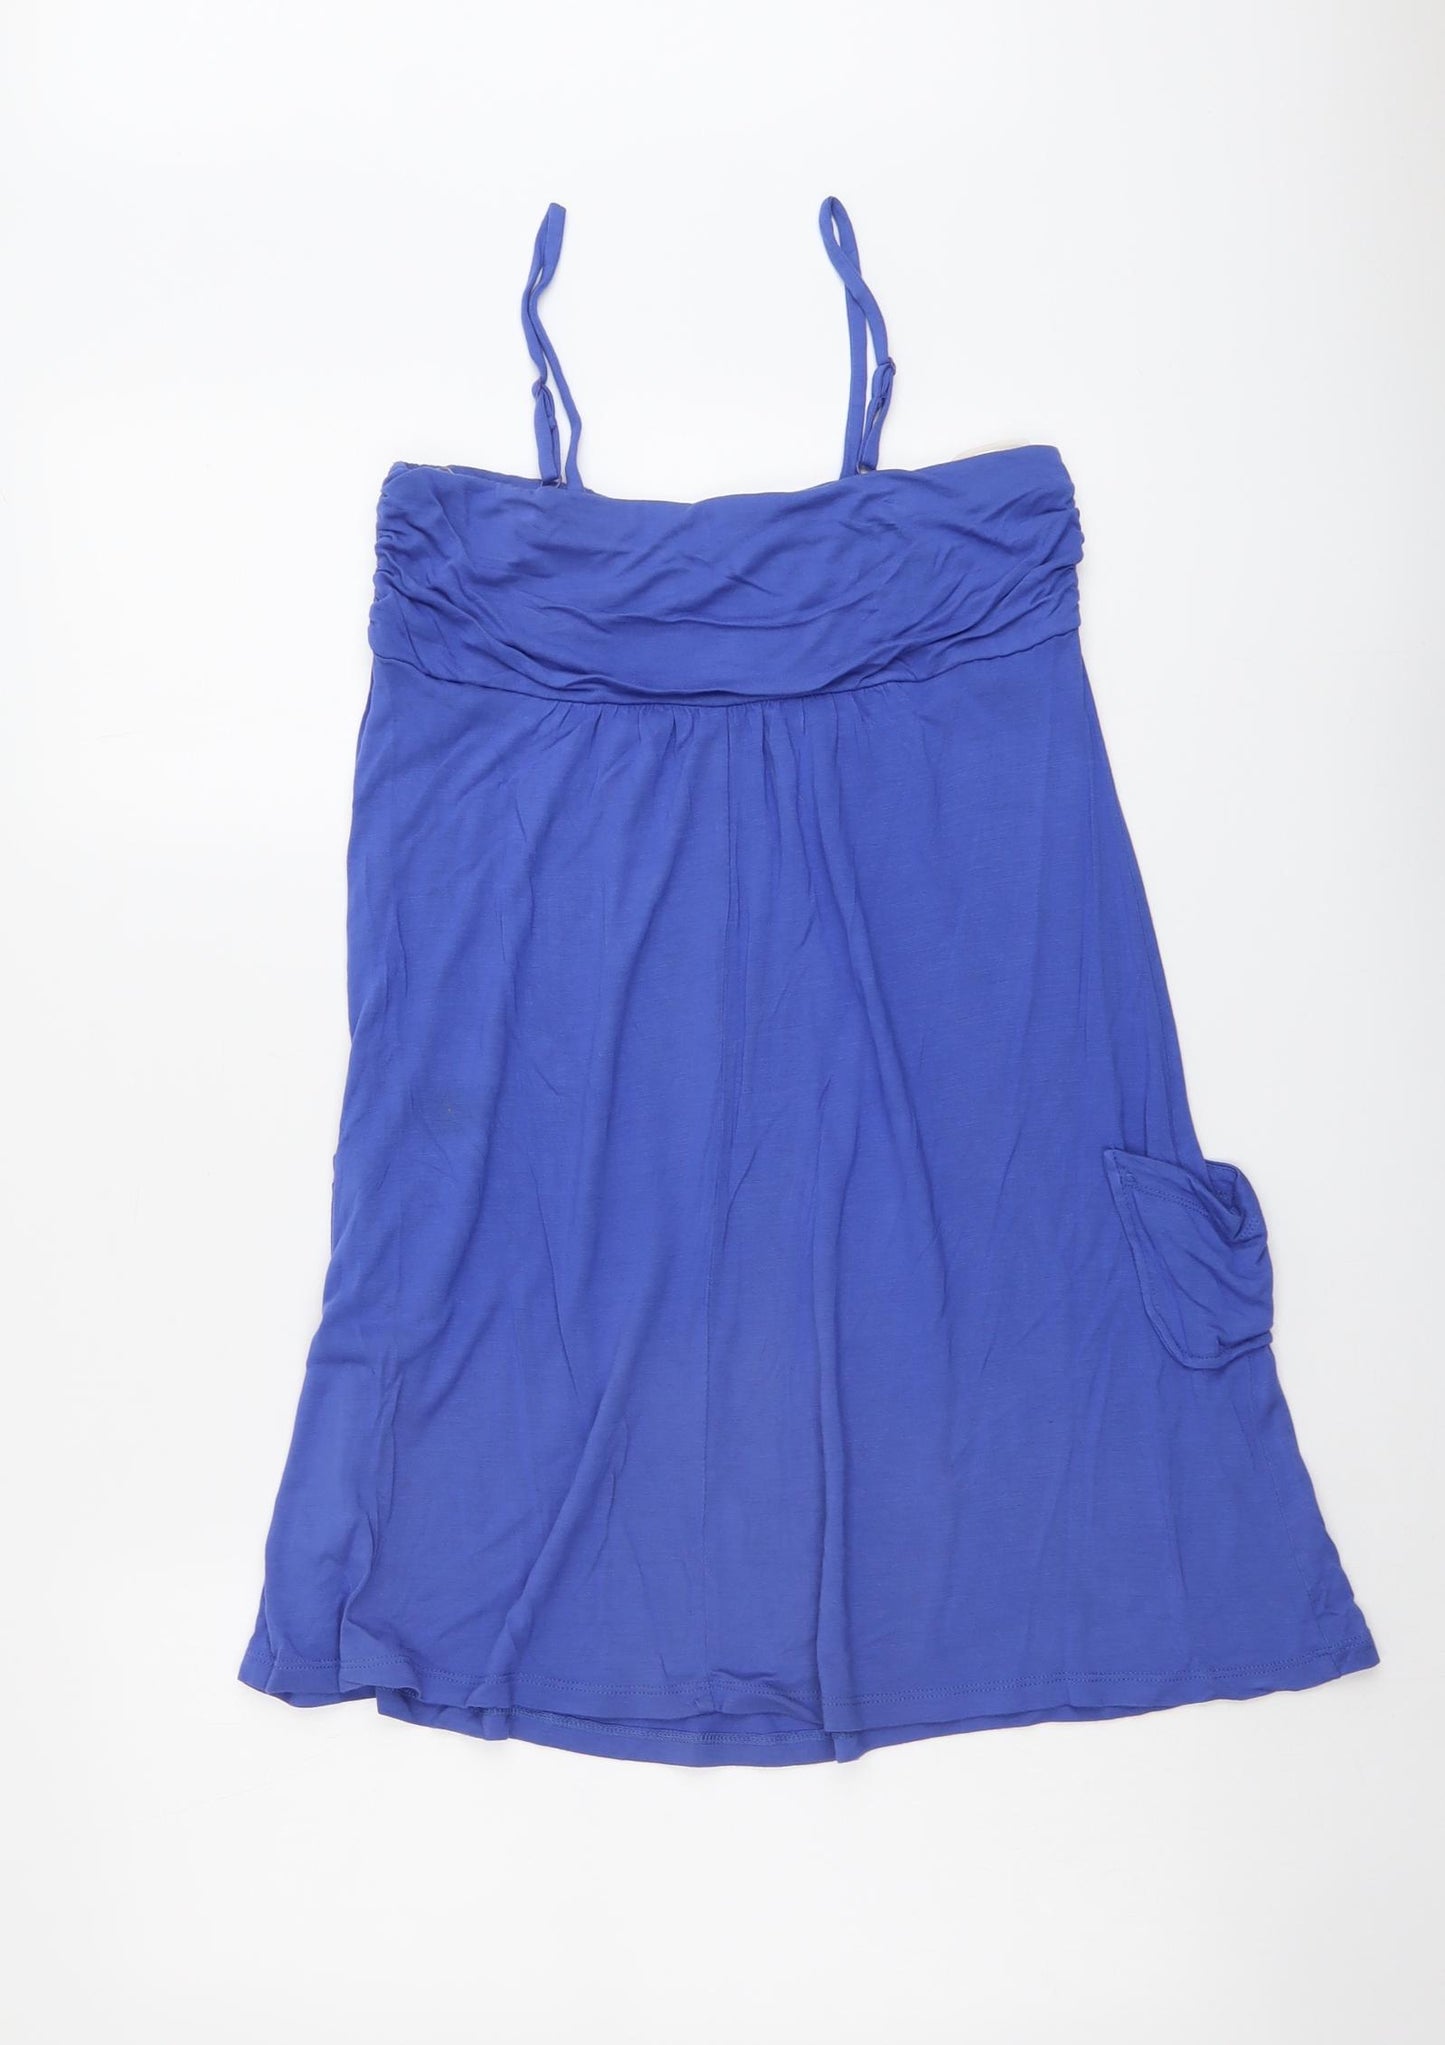 New Look Girls Blue Cotton Tank Dress Size 14-15 Years Scoop Neck Pullover